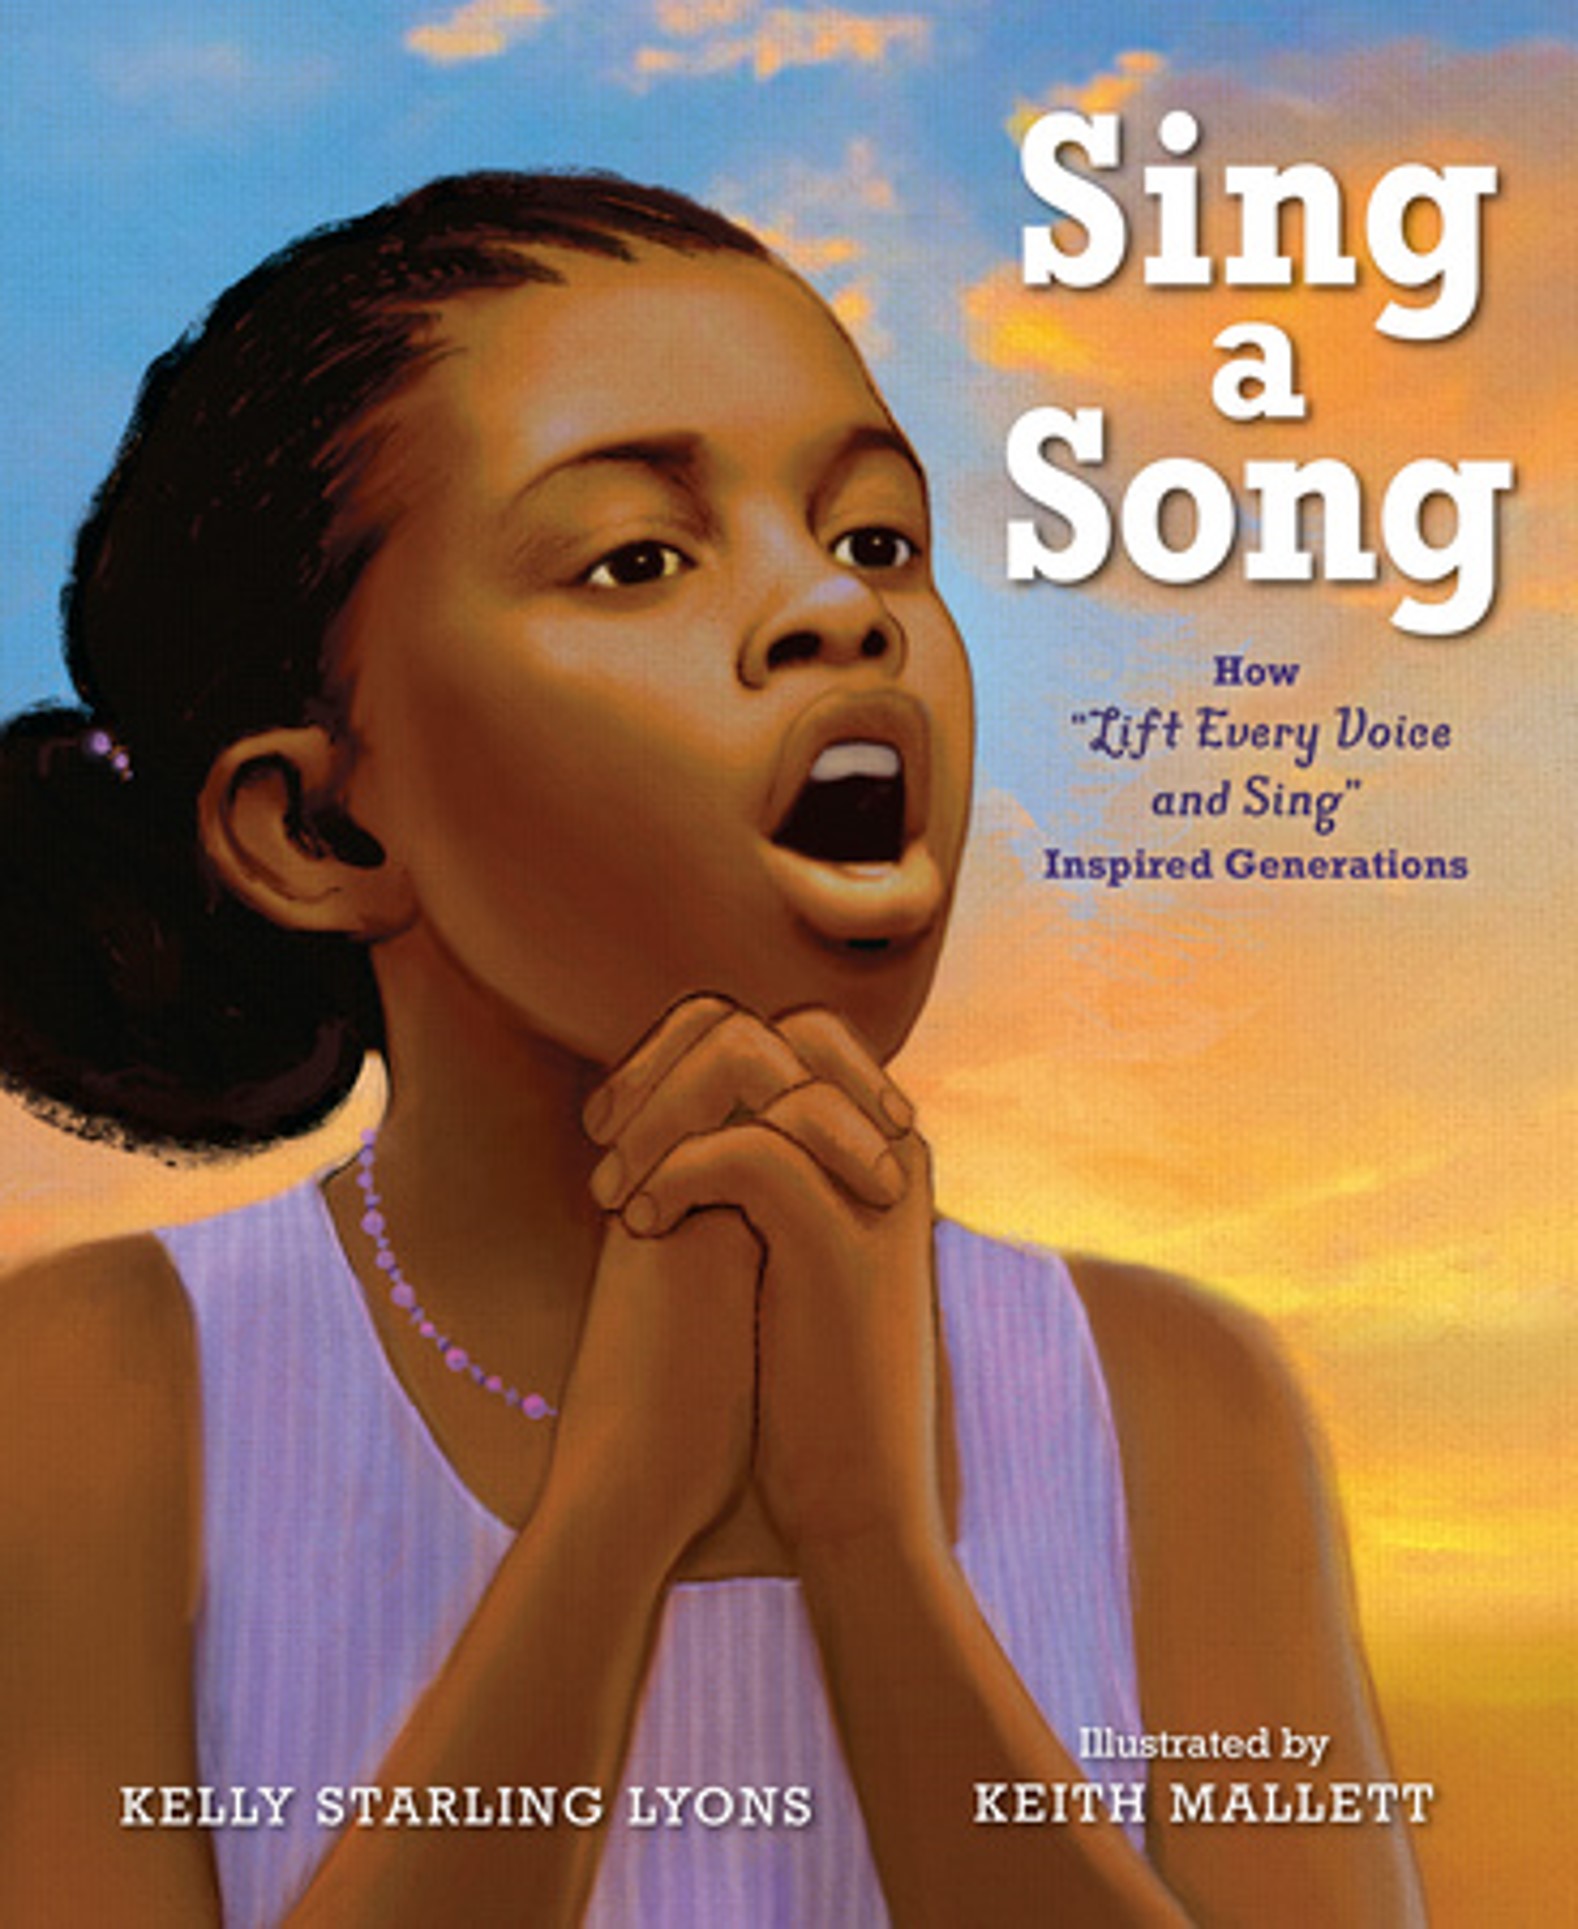 Book cover of Sing a Song: How "Lift Every Voice and Sing" Inspired Generations.